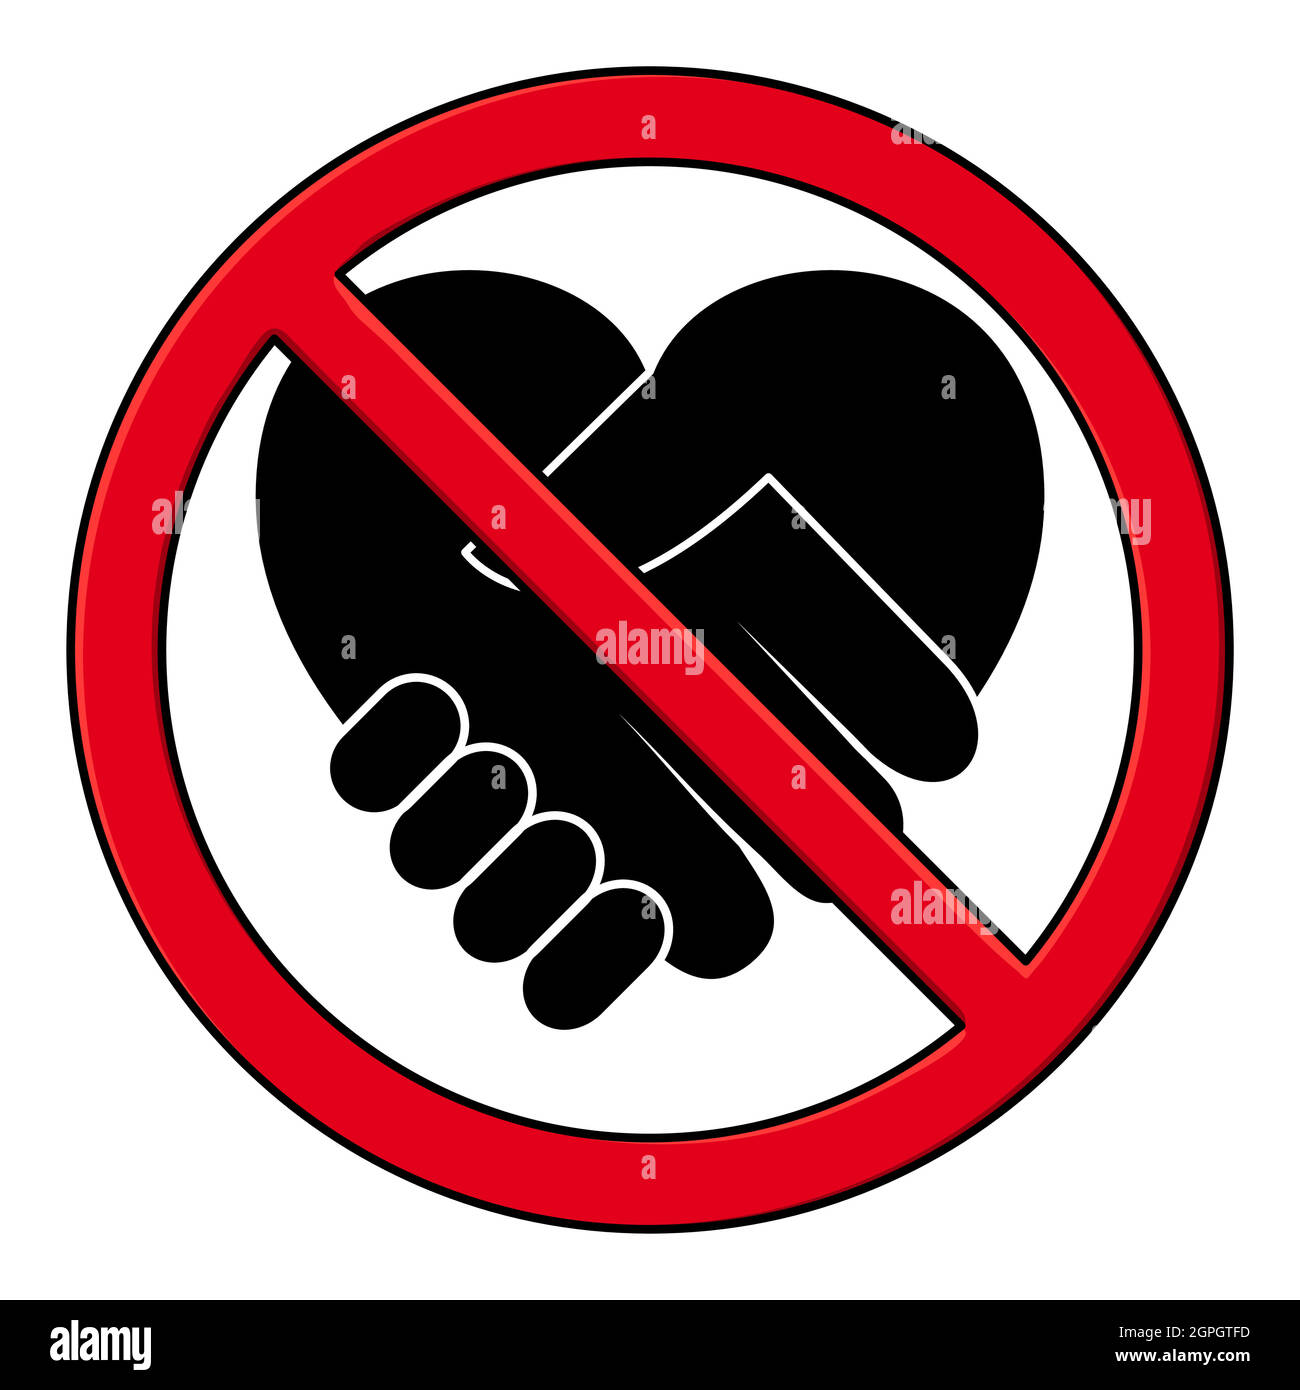 Handshake forbidden pictogram. Black icon of hand shake in red no sign. Stock Vector